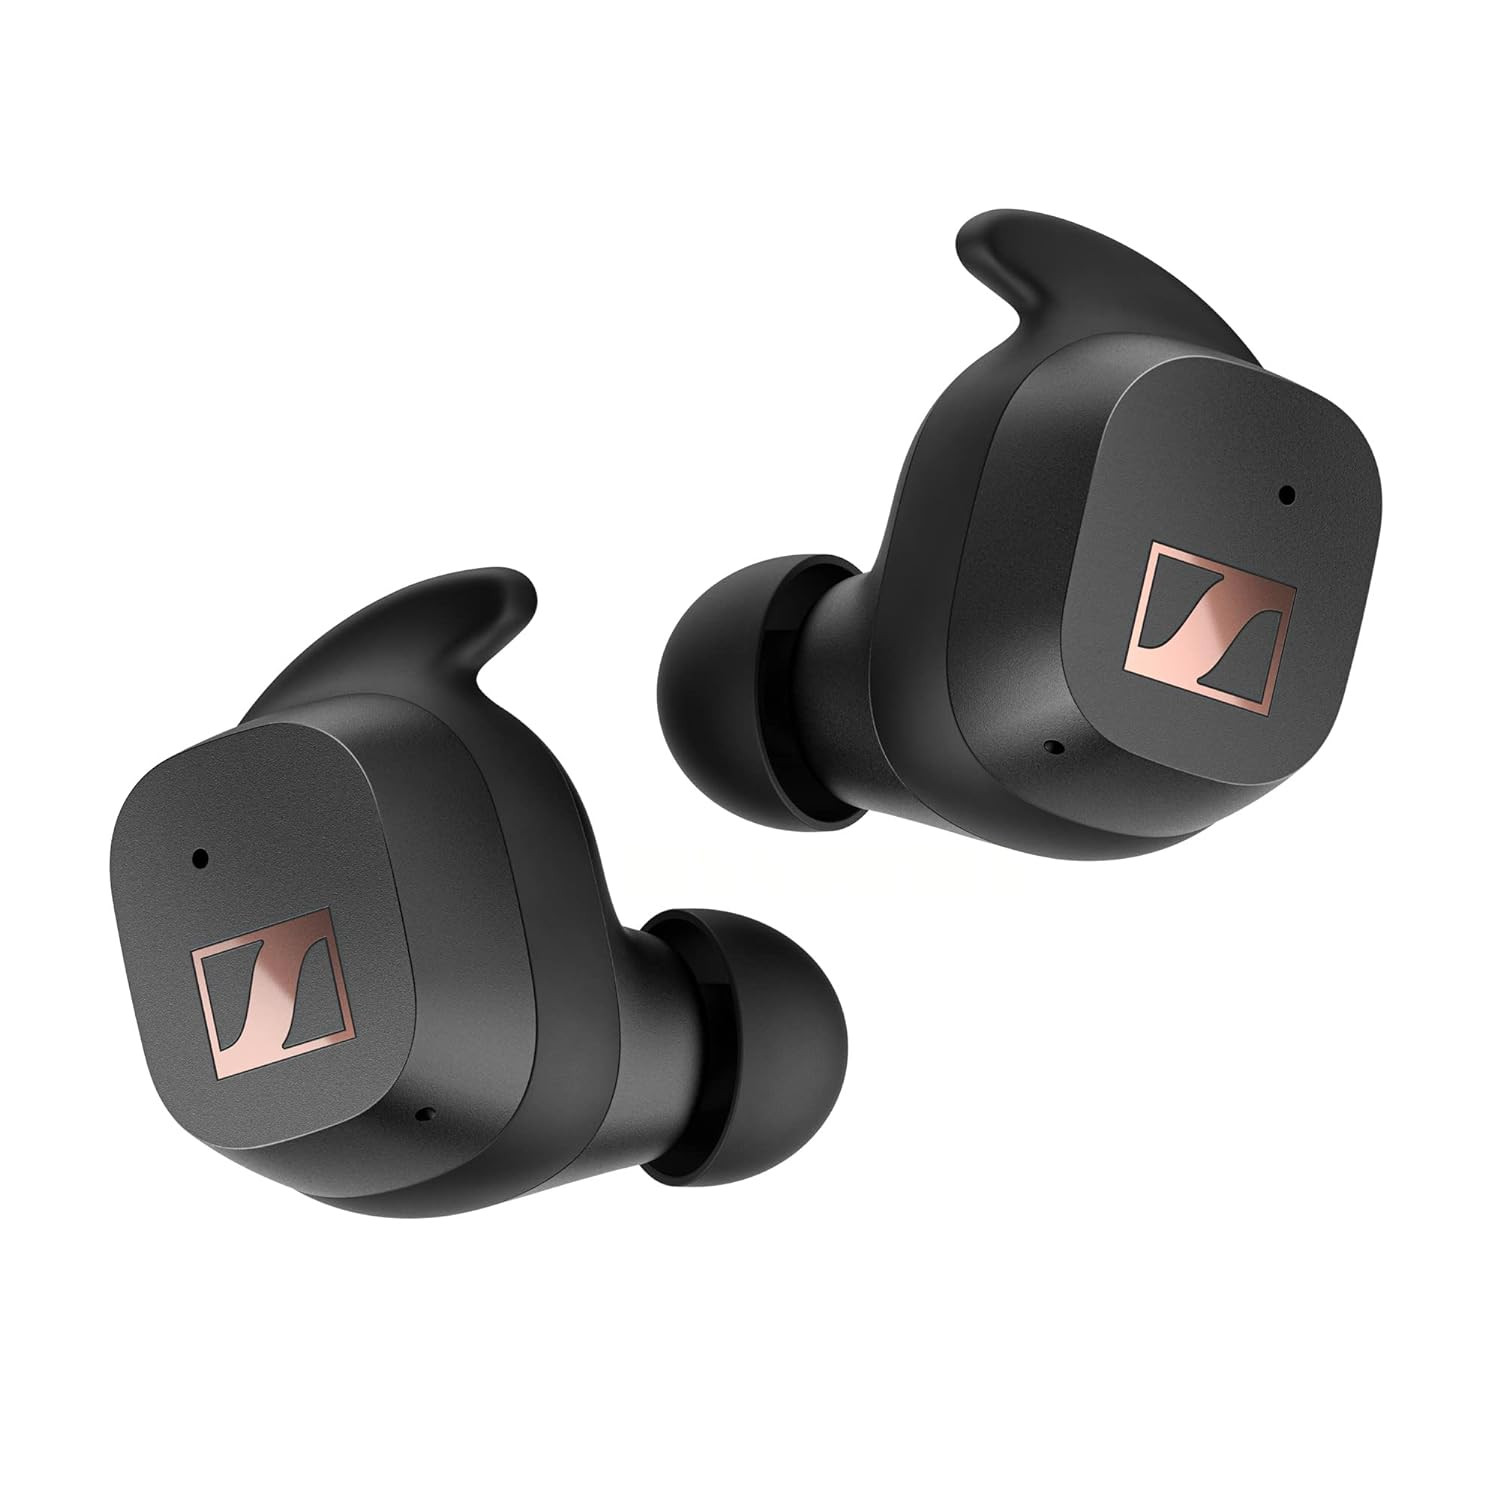 Sennheiser Sport True Wireless in Ear Earbuds Bluetooth Headphone with Mic Designed in Germany Adaptable Acoustics Noise Cancellation Touch Controls IP54 and 27h Battery 2Yr Warranty Black